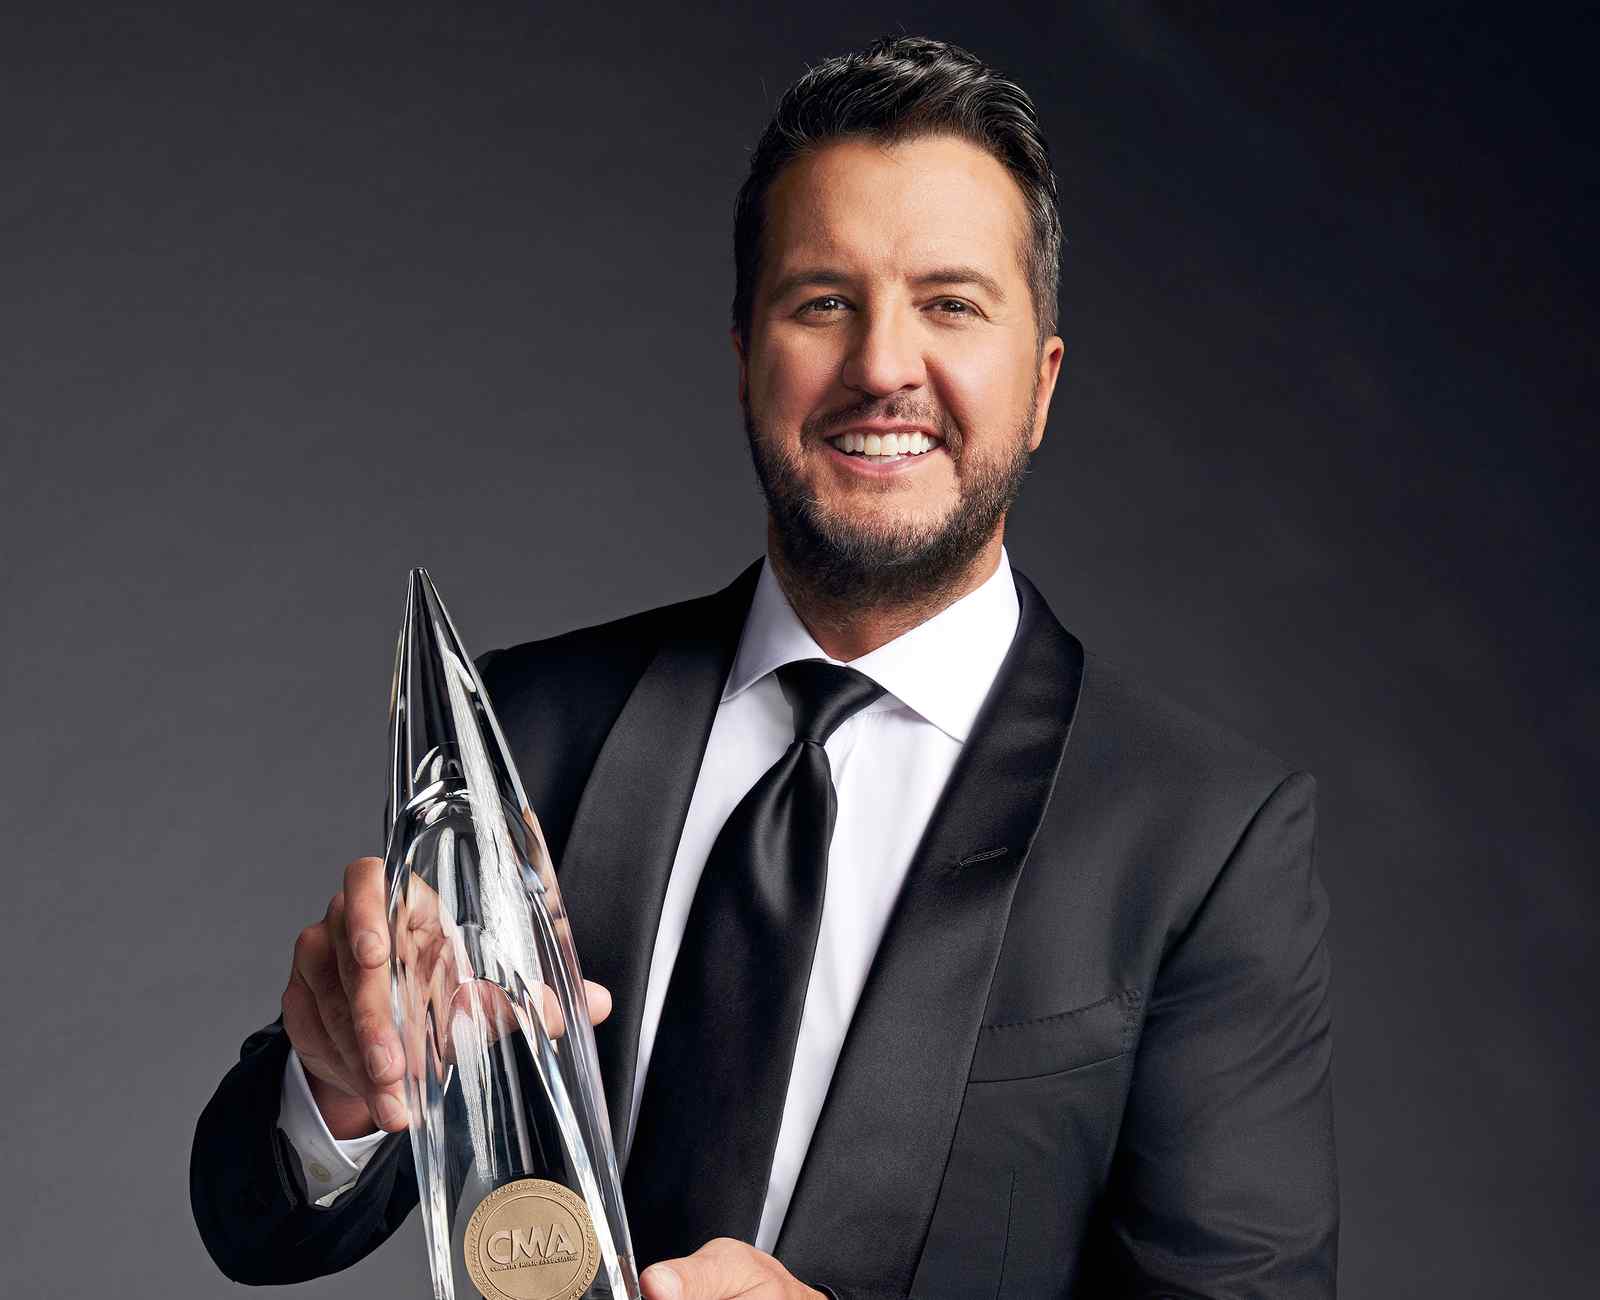 TWO-TIME CMA ENTERTAINER OF THE YEAR LUKE BRYAN   TO HOST “THE 55TH ANNUAL CMA AWARDS”